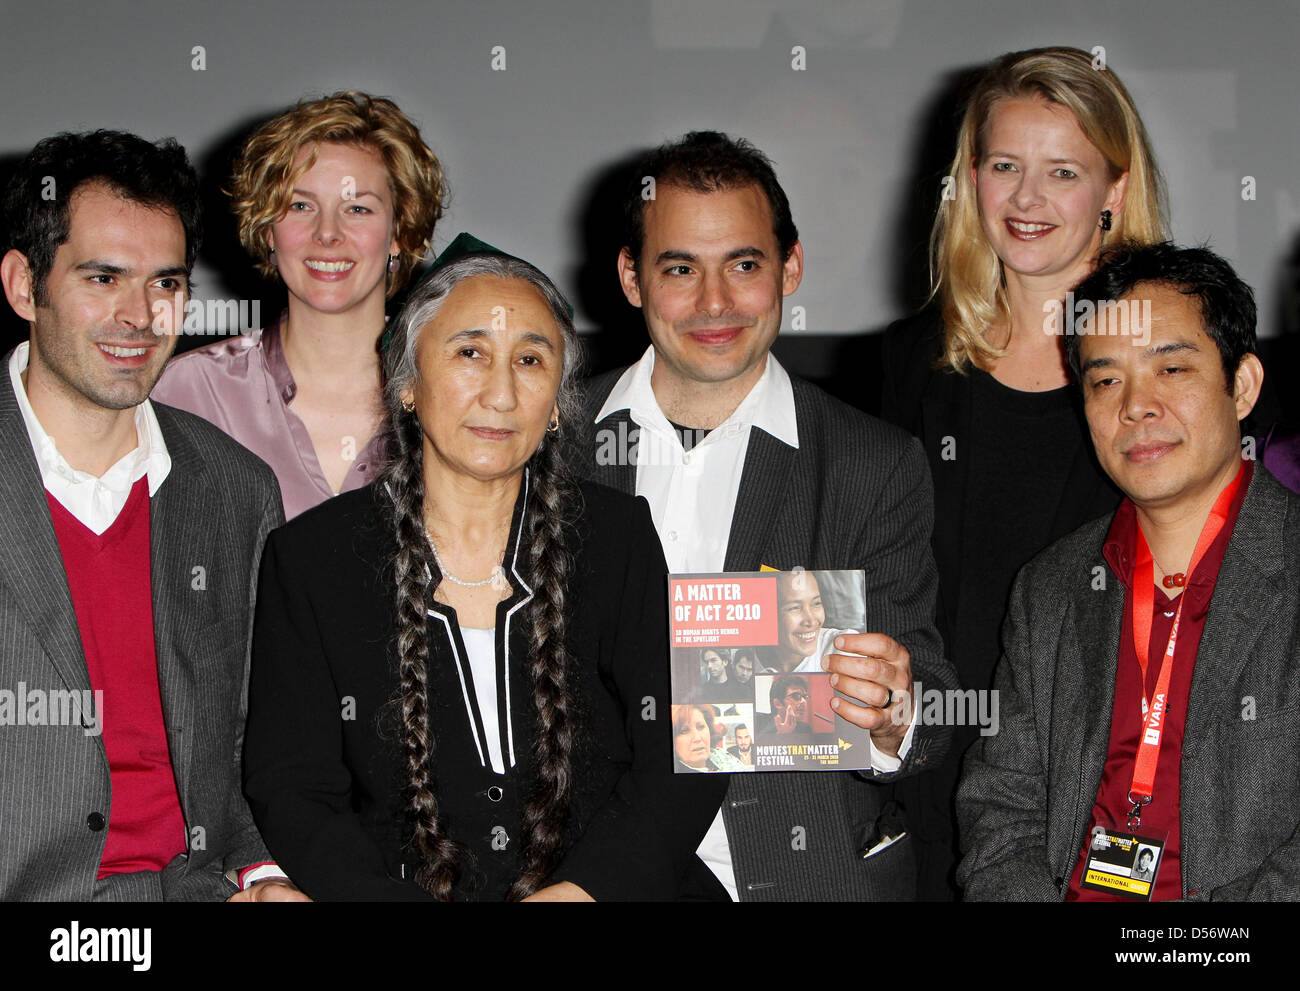 Princess Mabel of the Netherlands (2nd R) poses with human right activists who are nominated for the two Amnesty International Awards 'Gouden Vlinder' of the 'Movies that Matter' festival held at the 'Filmhouse' in The Hague, Netherlands, 27 March 2010. The Movies that Matter festival is a platform for documentaries and movies that stir the debate about human rights and human digni Stock Photo